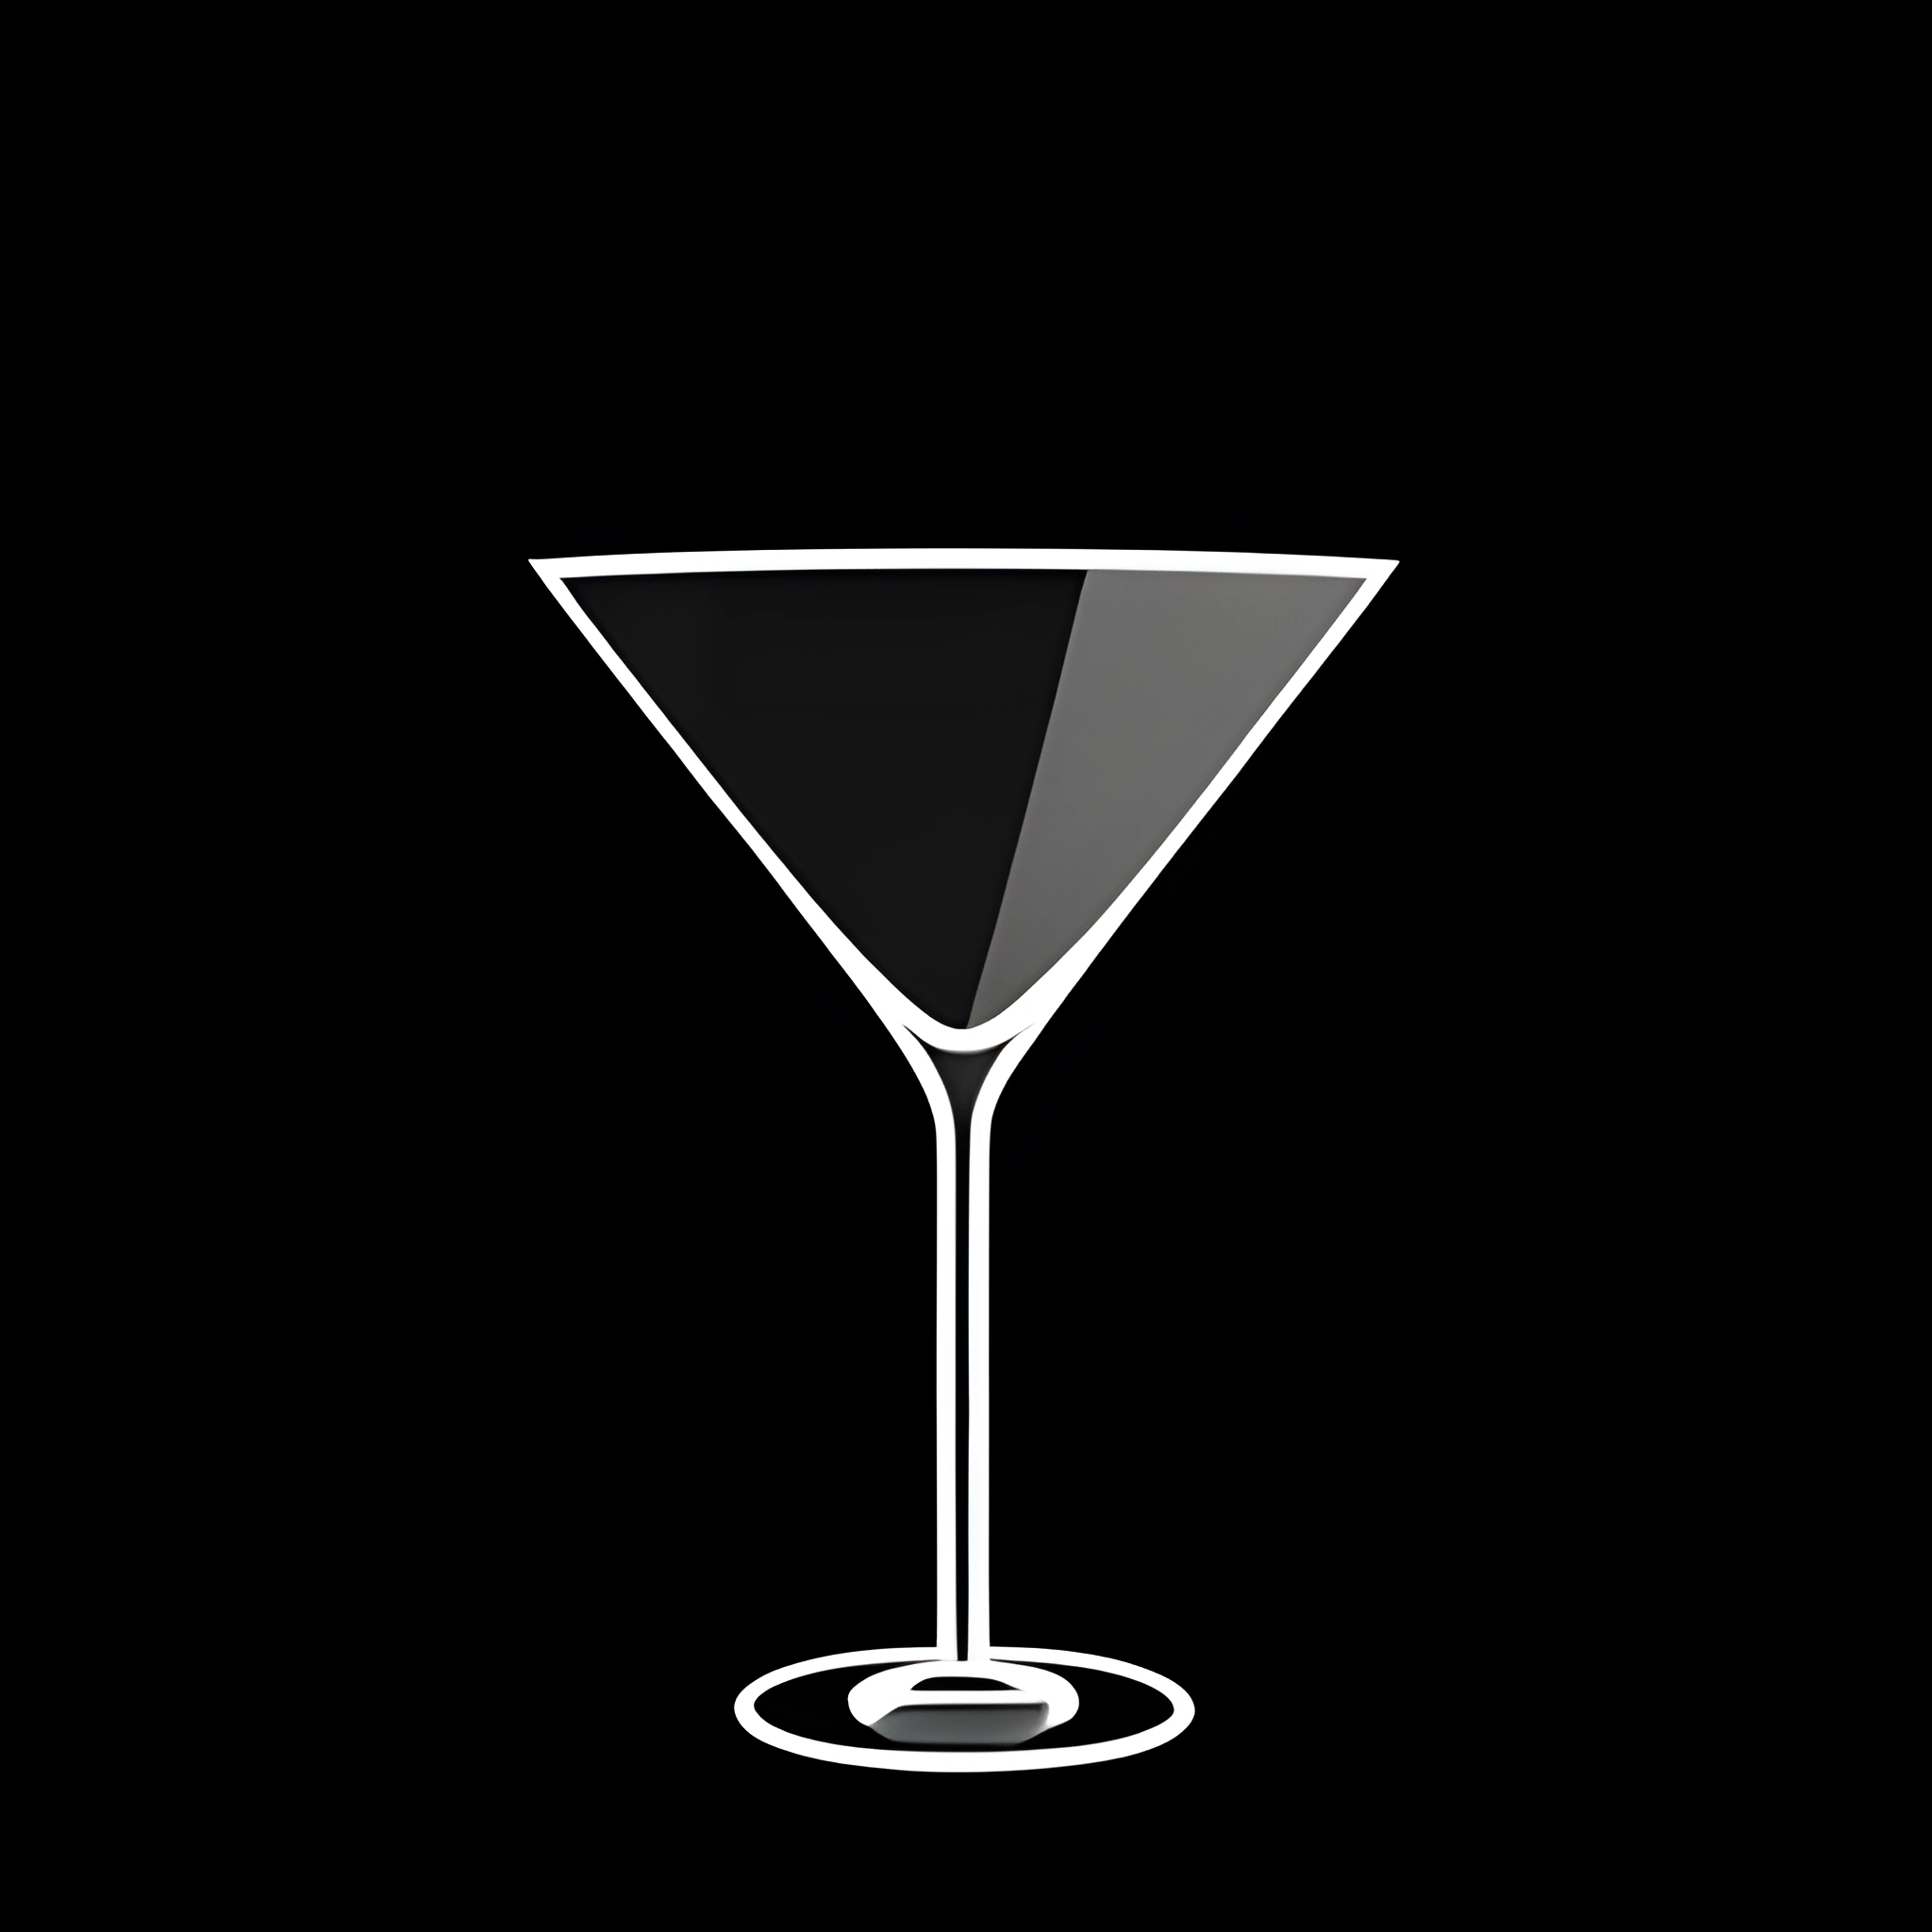 a close up of a glass of wine on a black background